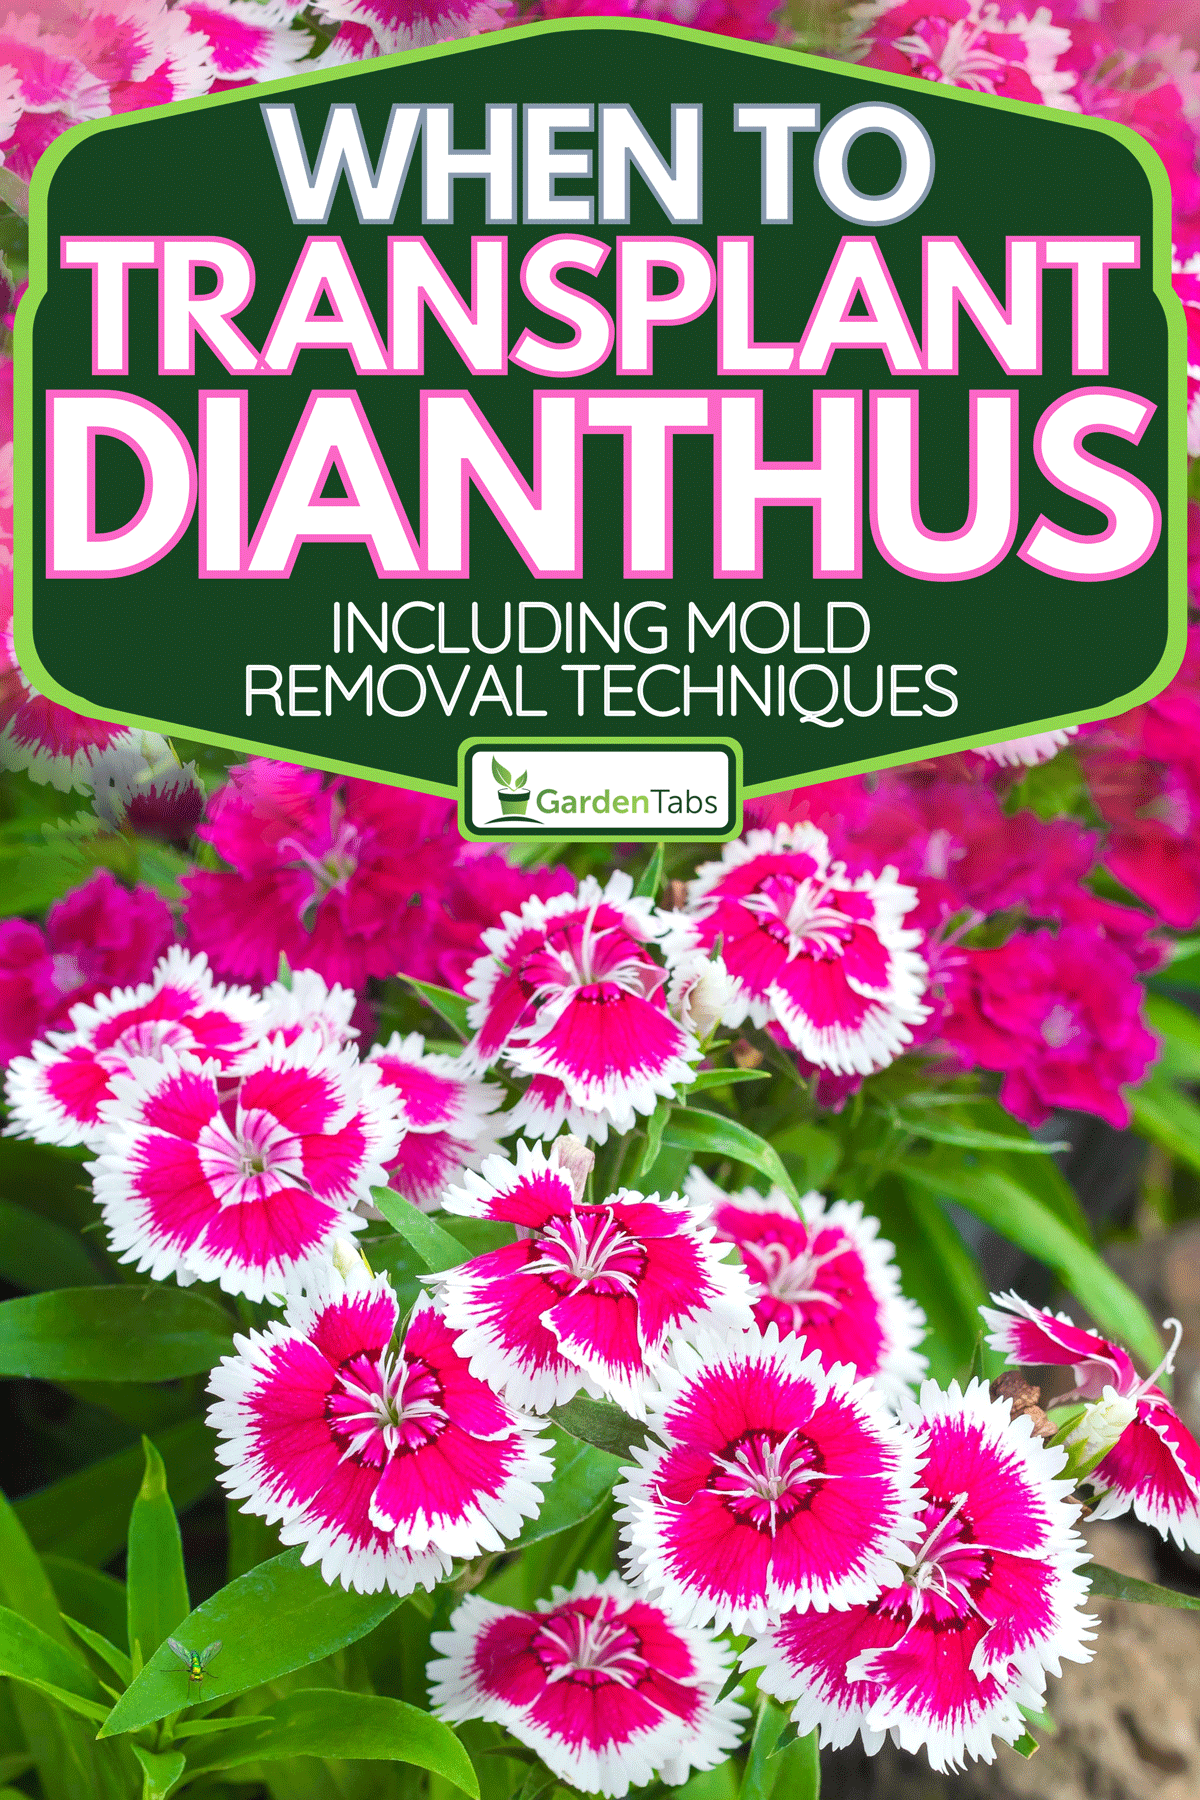 When To Transplant Dianthus [And How To]